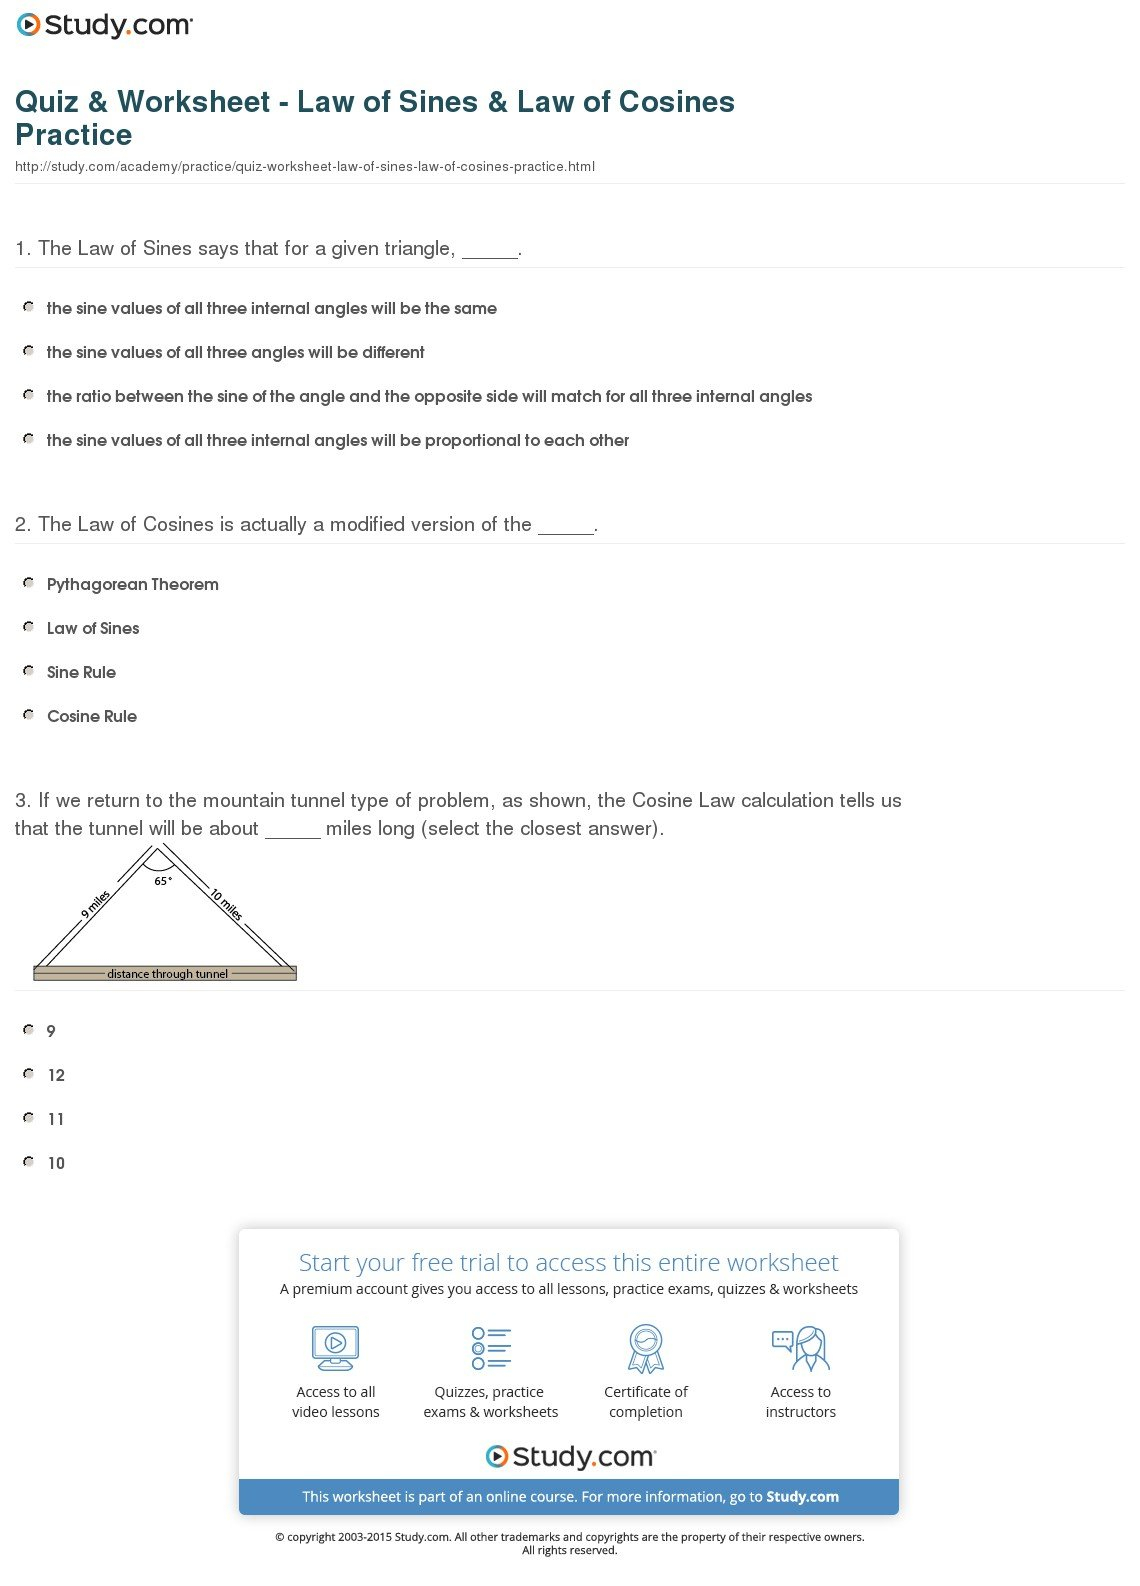 Quiz  Worksheet  Law Of Sines  Law Of Cosines Practice  Study With The Law Of Sines Worksheet Answers